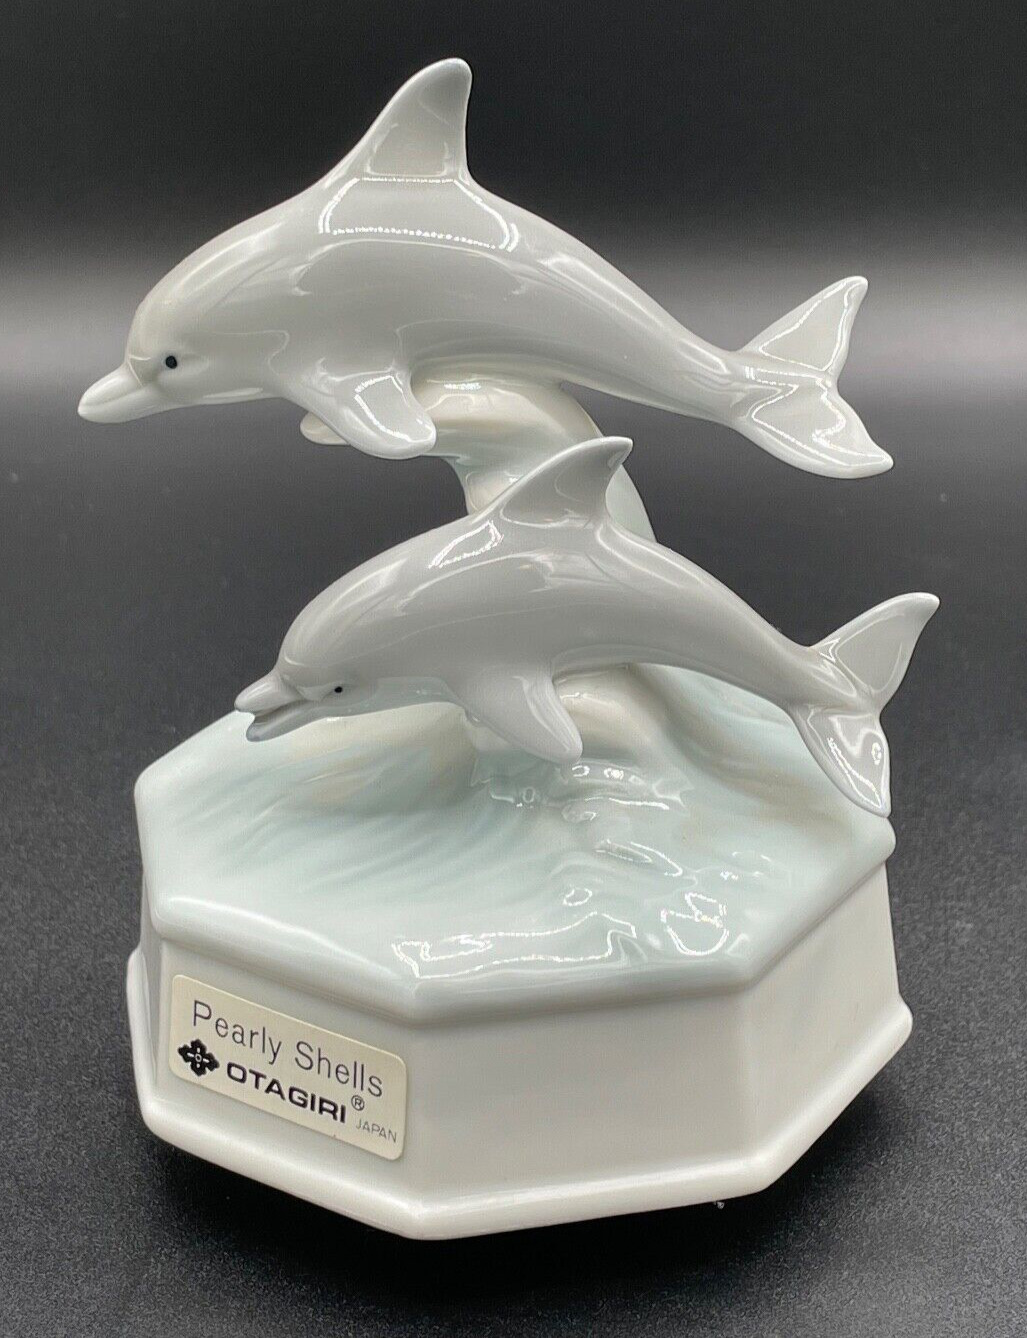 Vintage Otagiri Porcelain Music Box With Dolphins Plays Pearly Shells Revolving